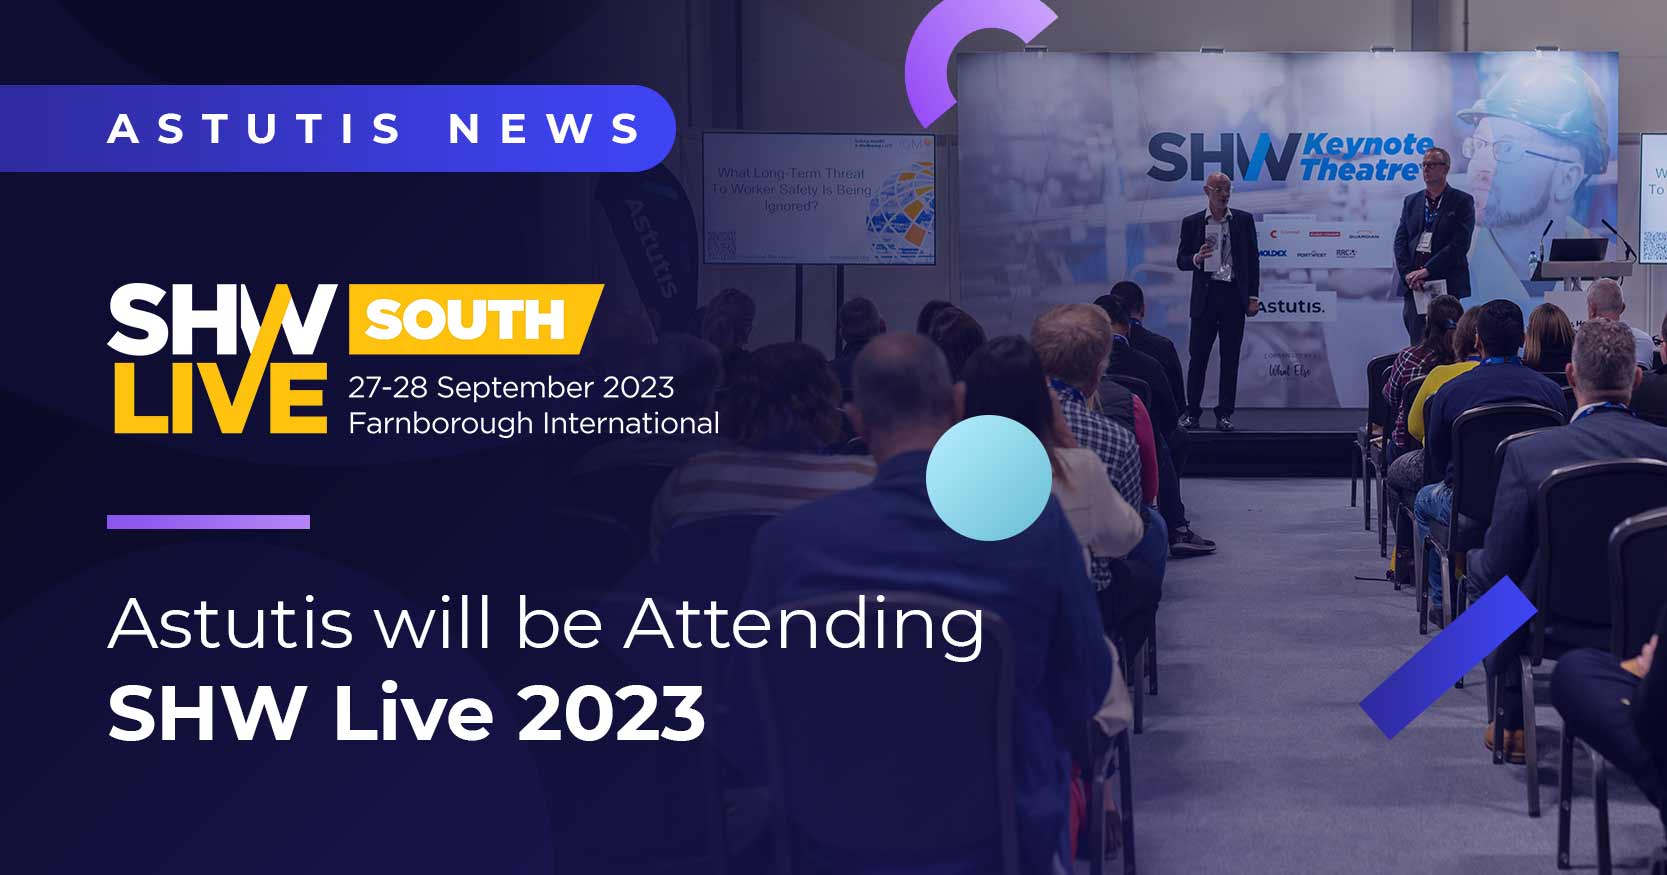 Astutis To Attend SHW Live 2023 Image